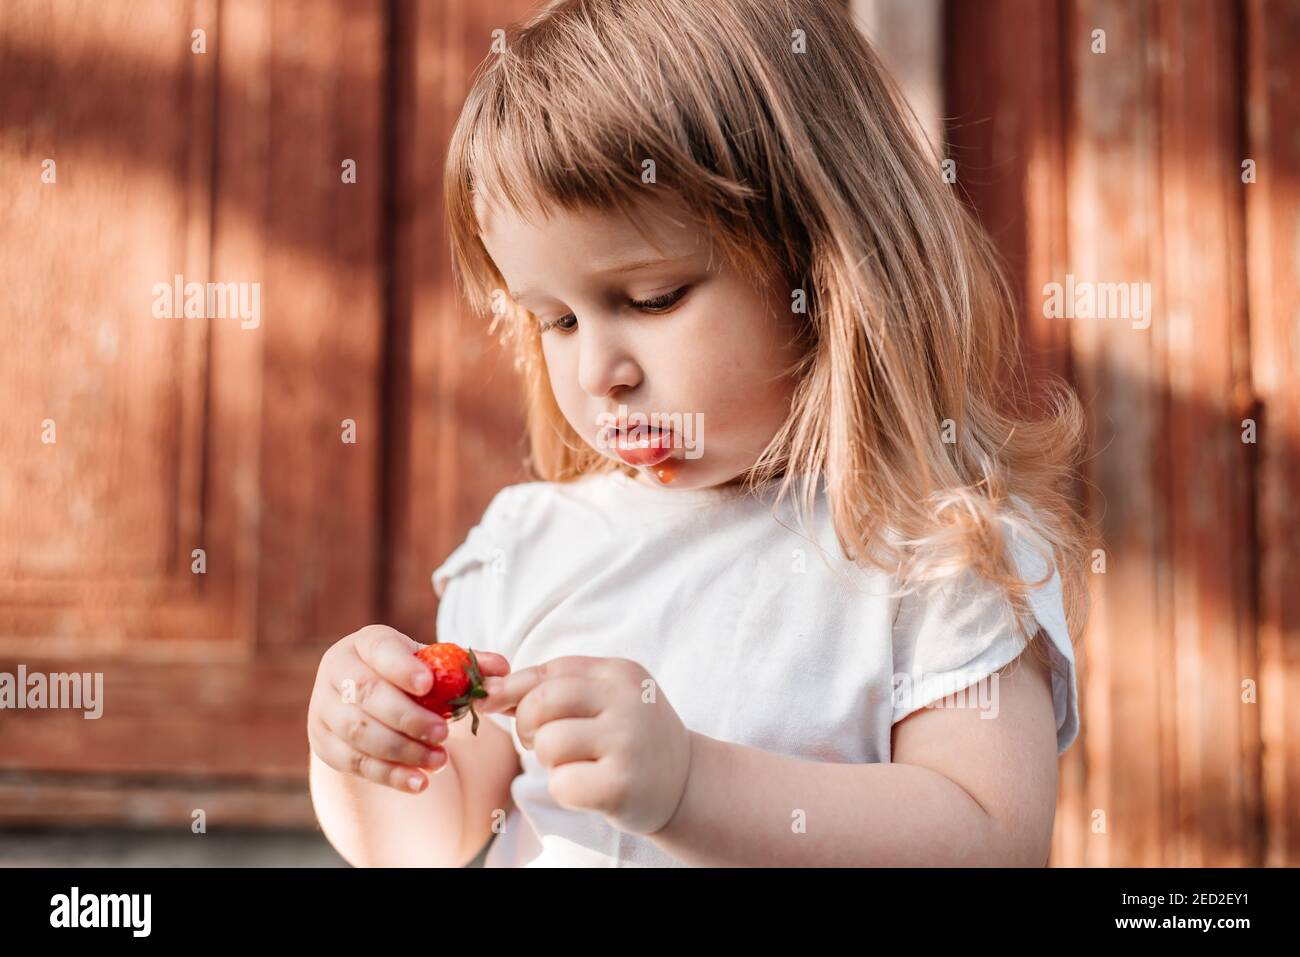 Child with food. Healthy eating Strawberry Stock Photo